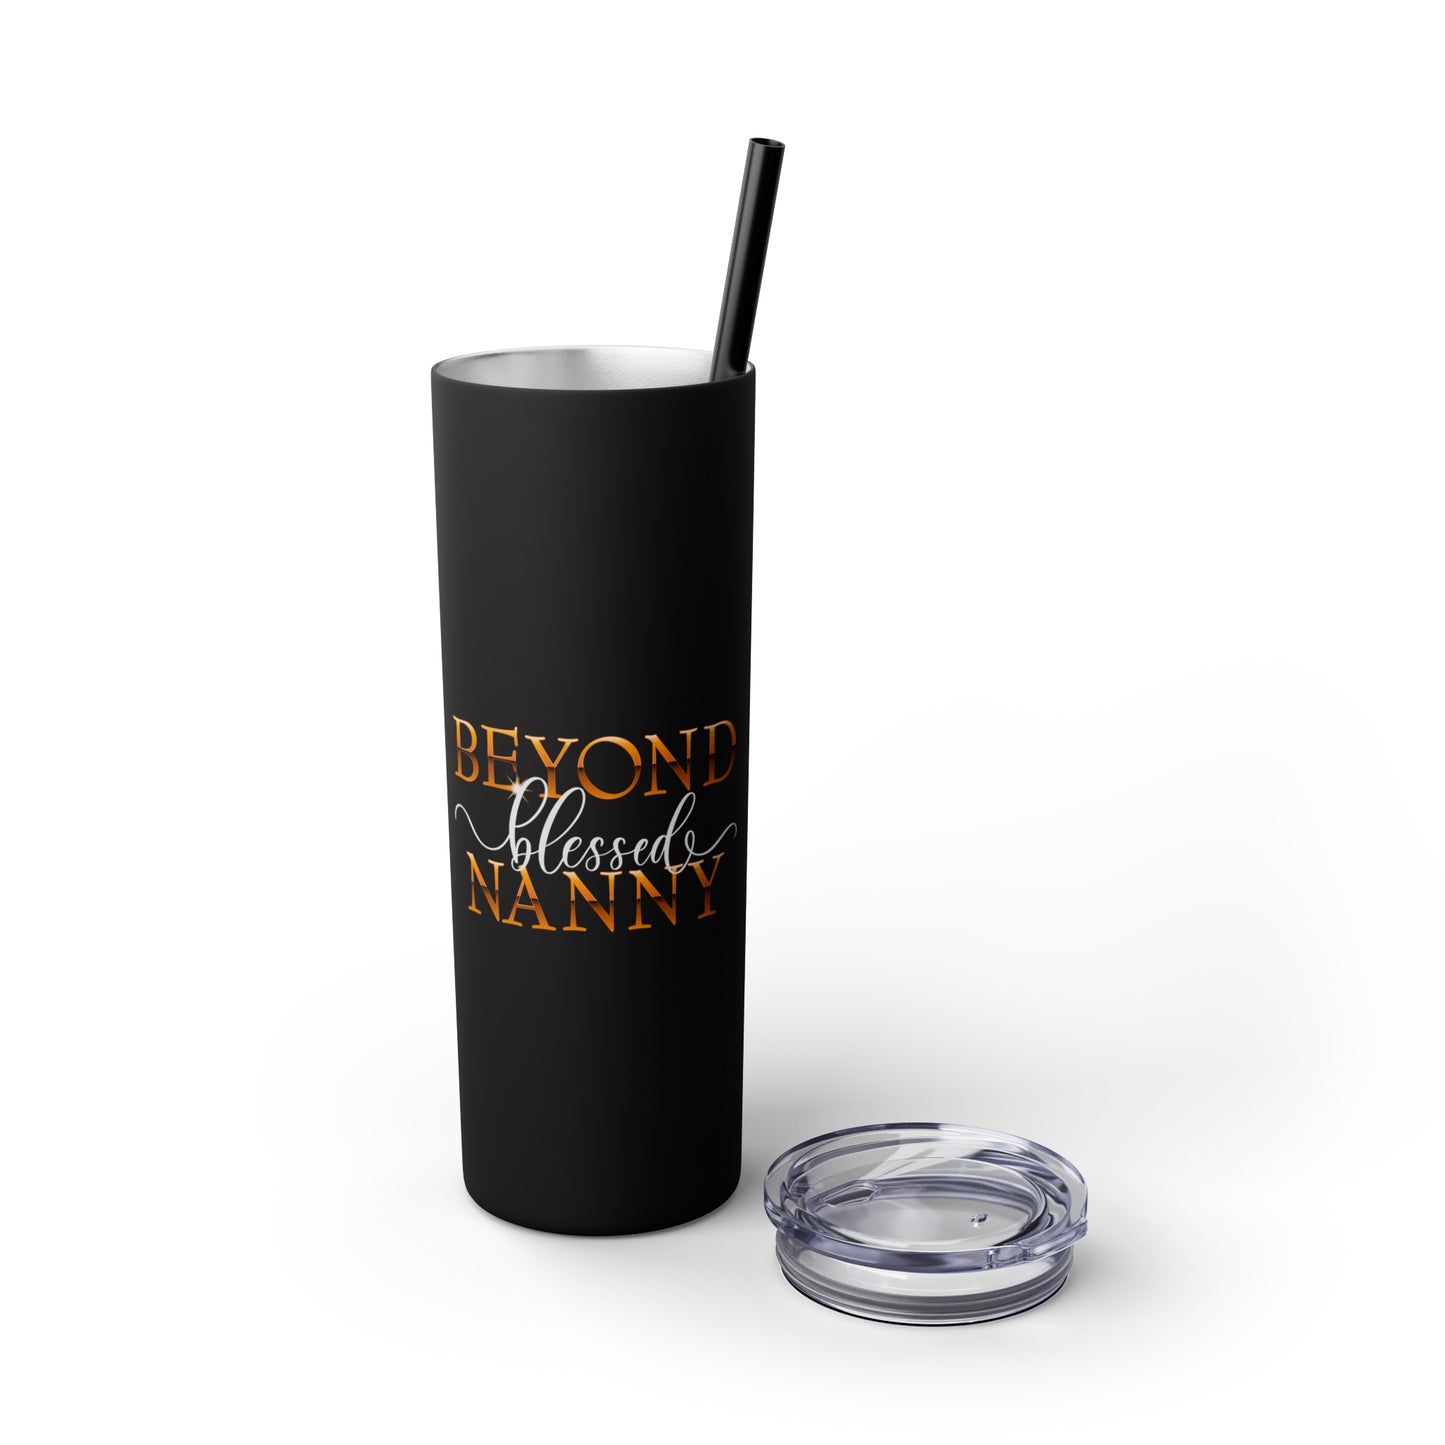 Beyond Blessed Nanny - White - Skinny Tumbler with Straw, 20oz